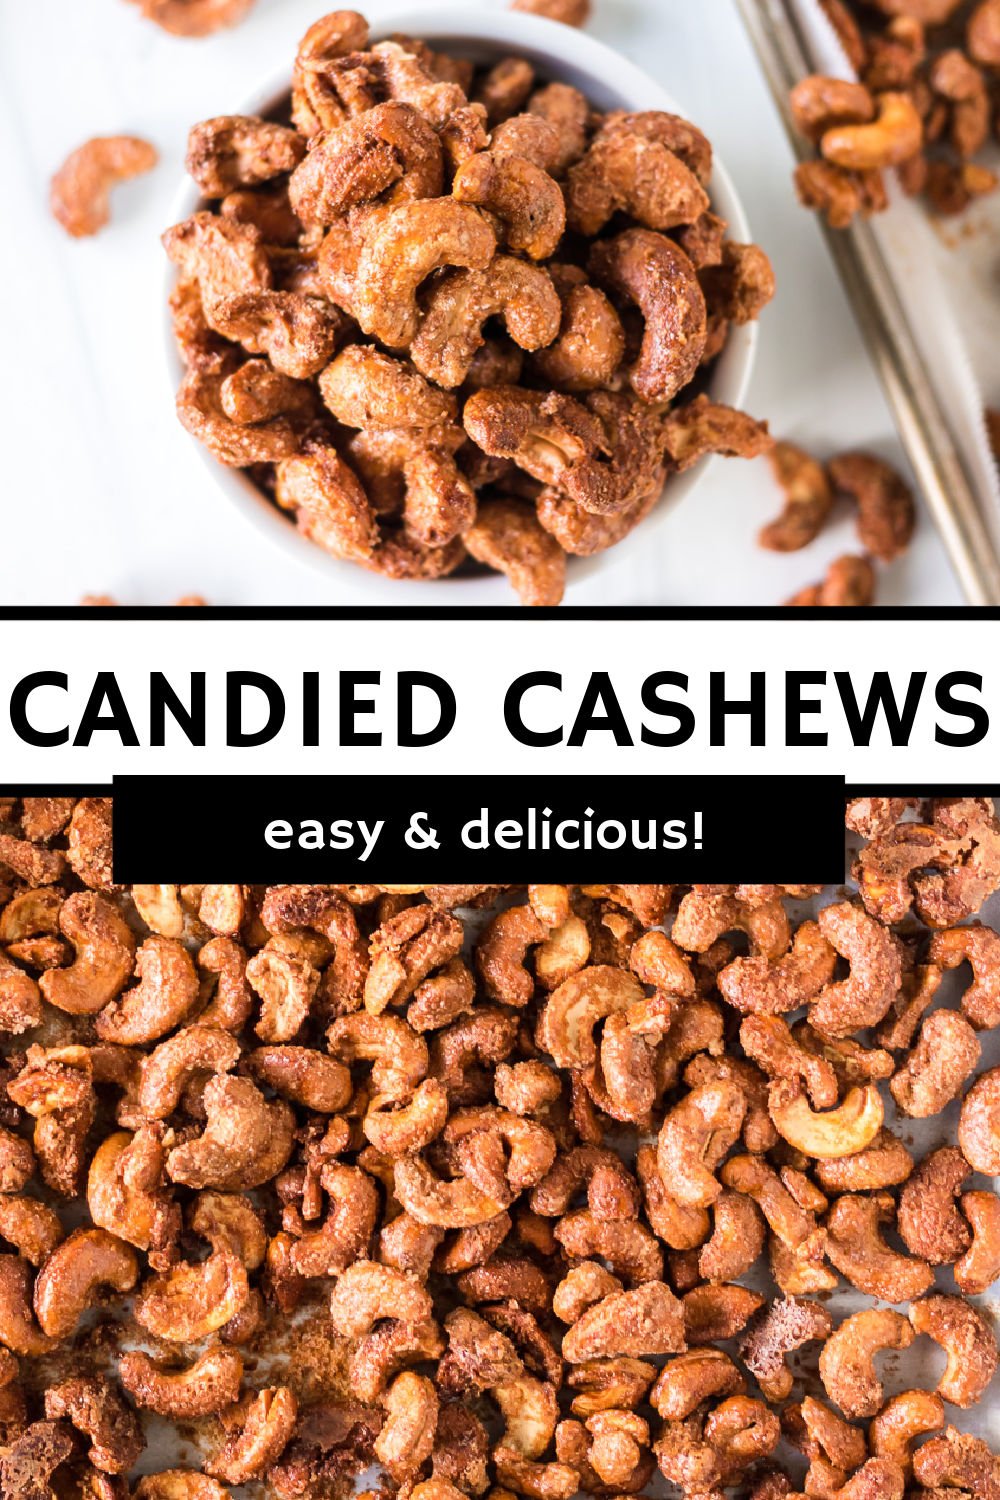 Easy Candied Cashews are crunchy, a little bit salty, and a little sweet with the cinnamon sugar coating. Perfect for snacking or gifting! | www.persnicketyplates.com